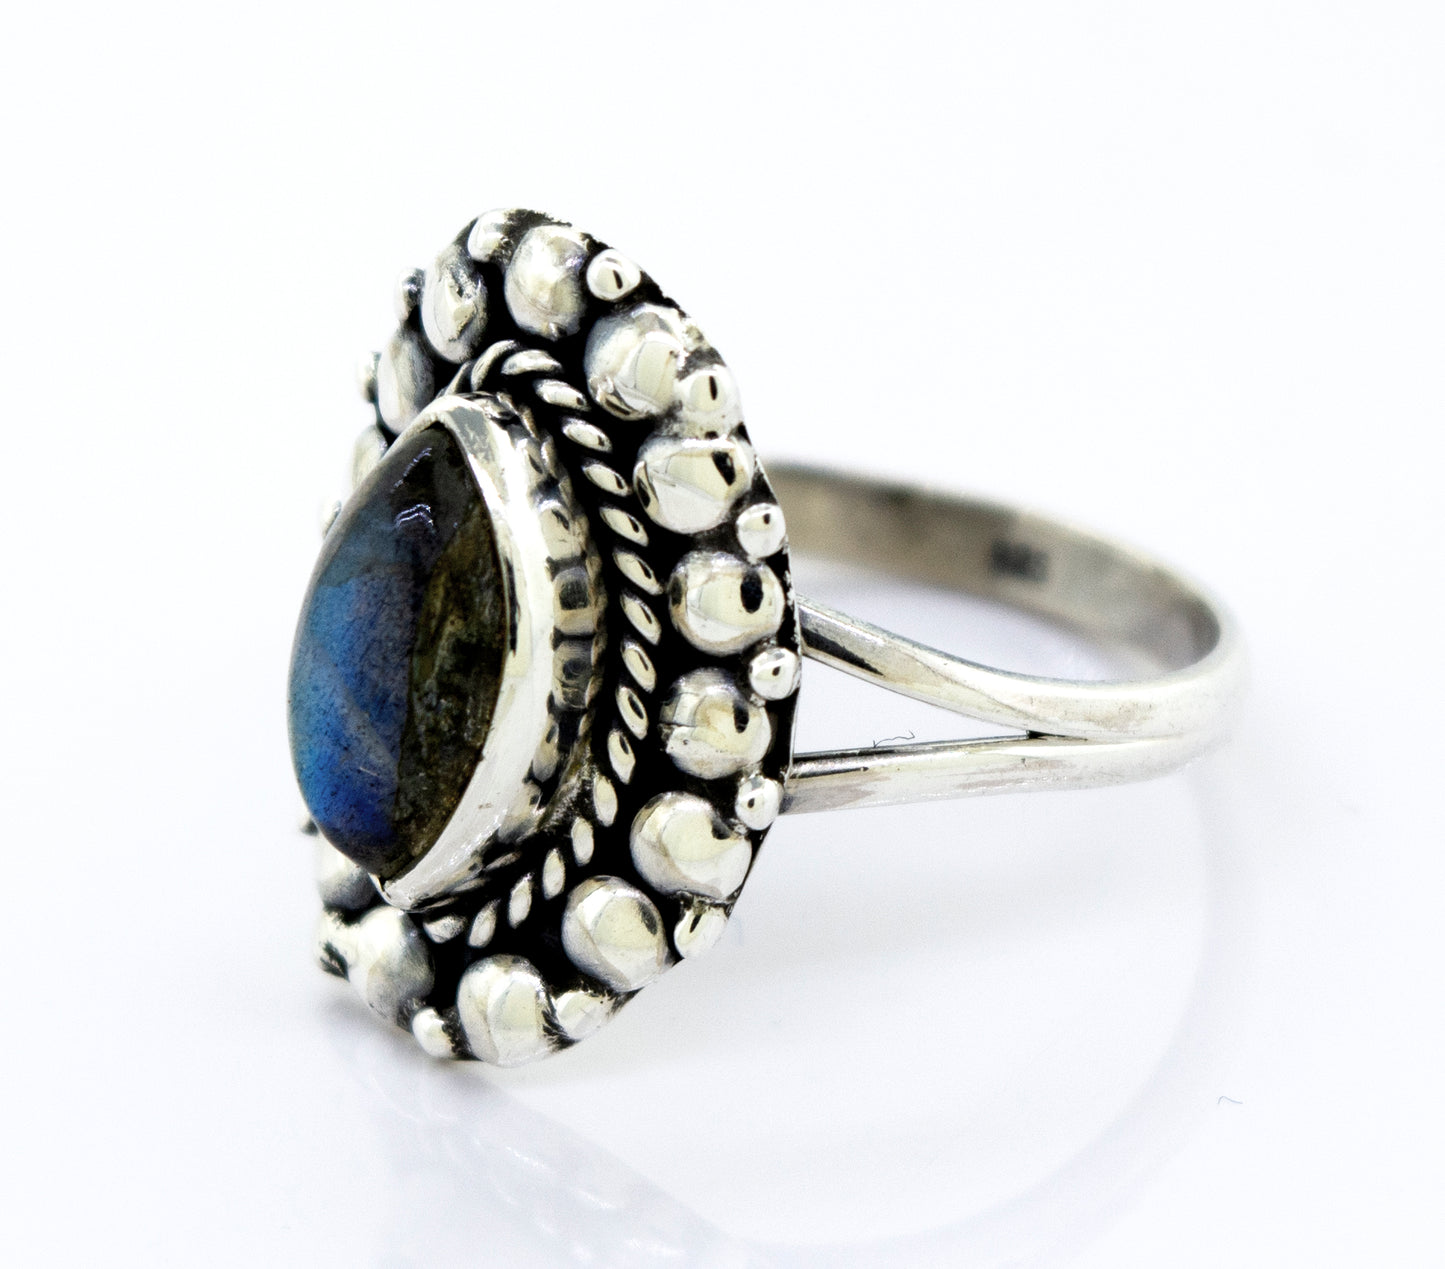 A Marquise Shaped Vibrant Labradorite Stone Ring from Super Silver featuring a beaded design.